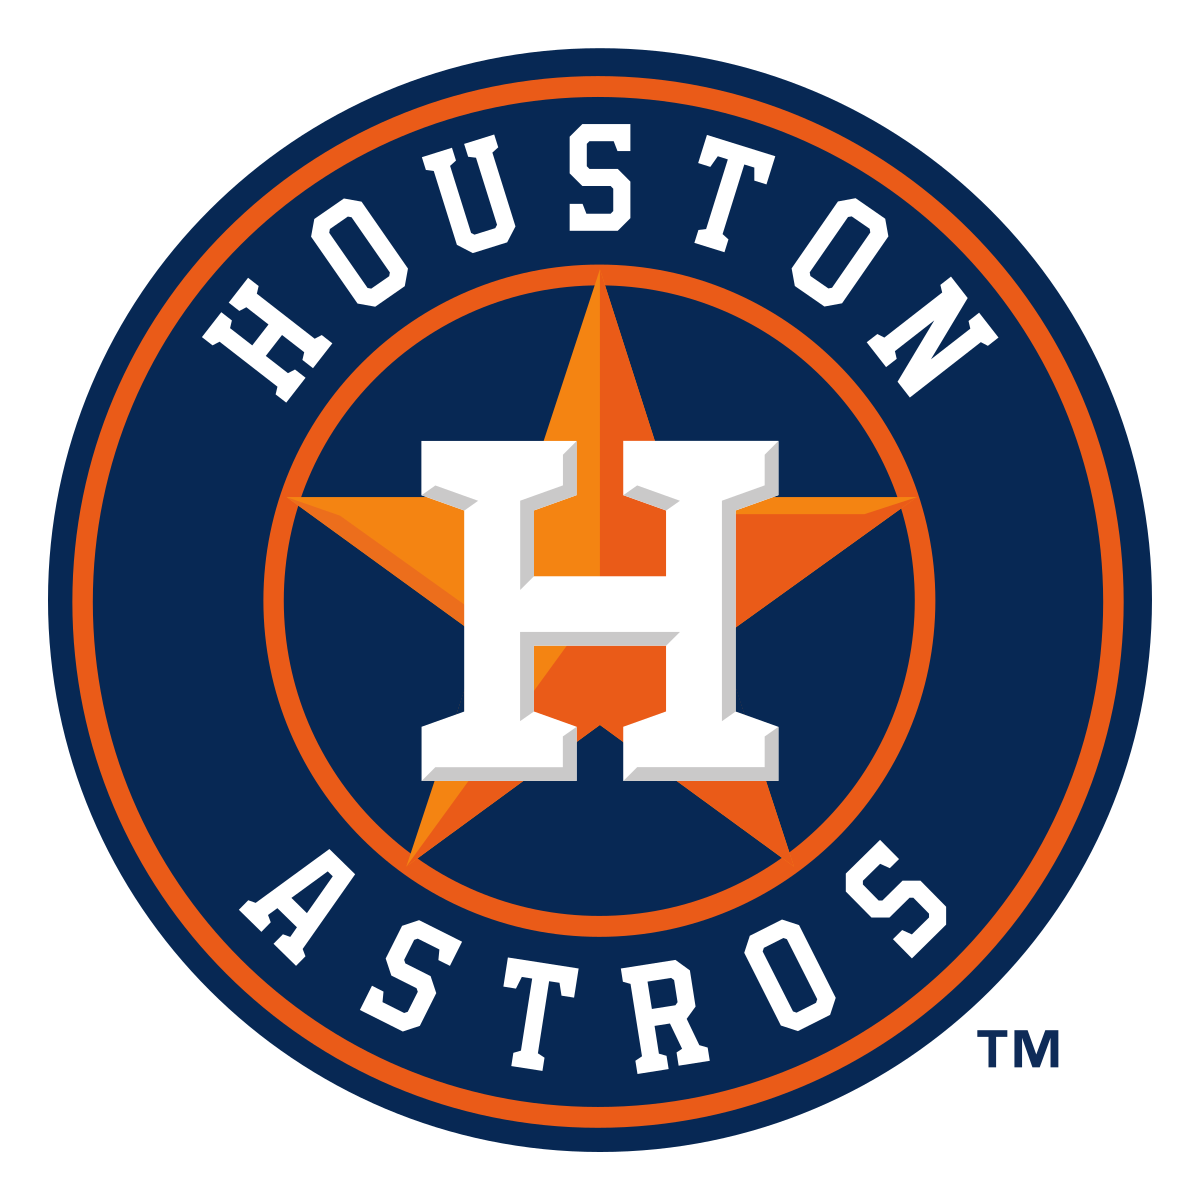 Presale Codes to purchase tickets for Houston Astros 2017 Postseason games